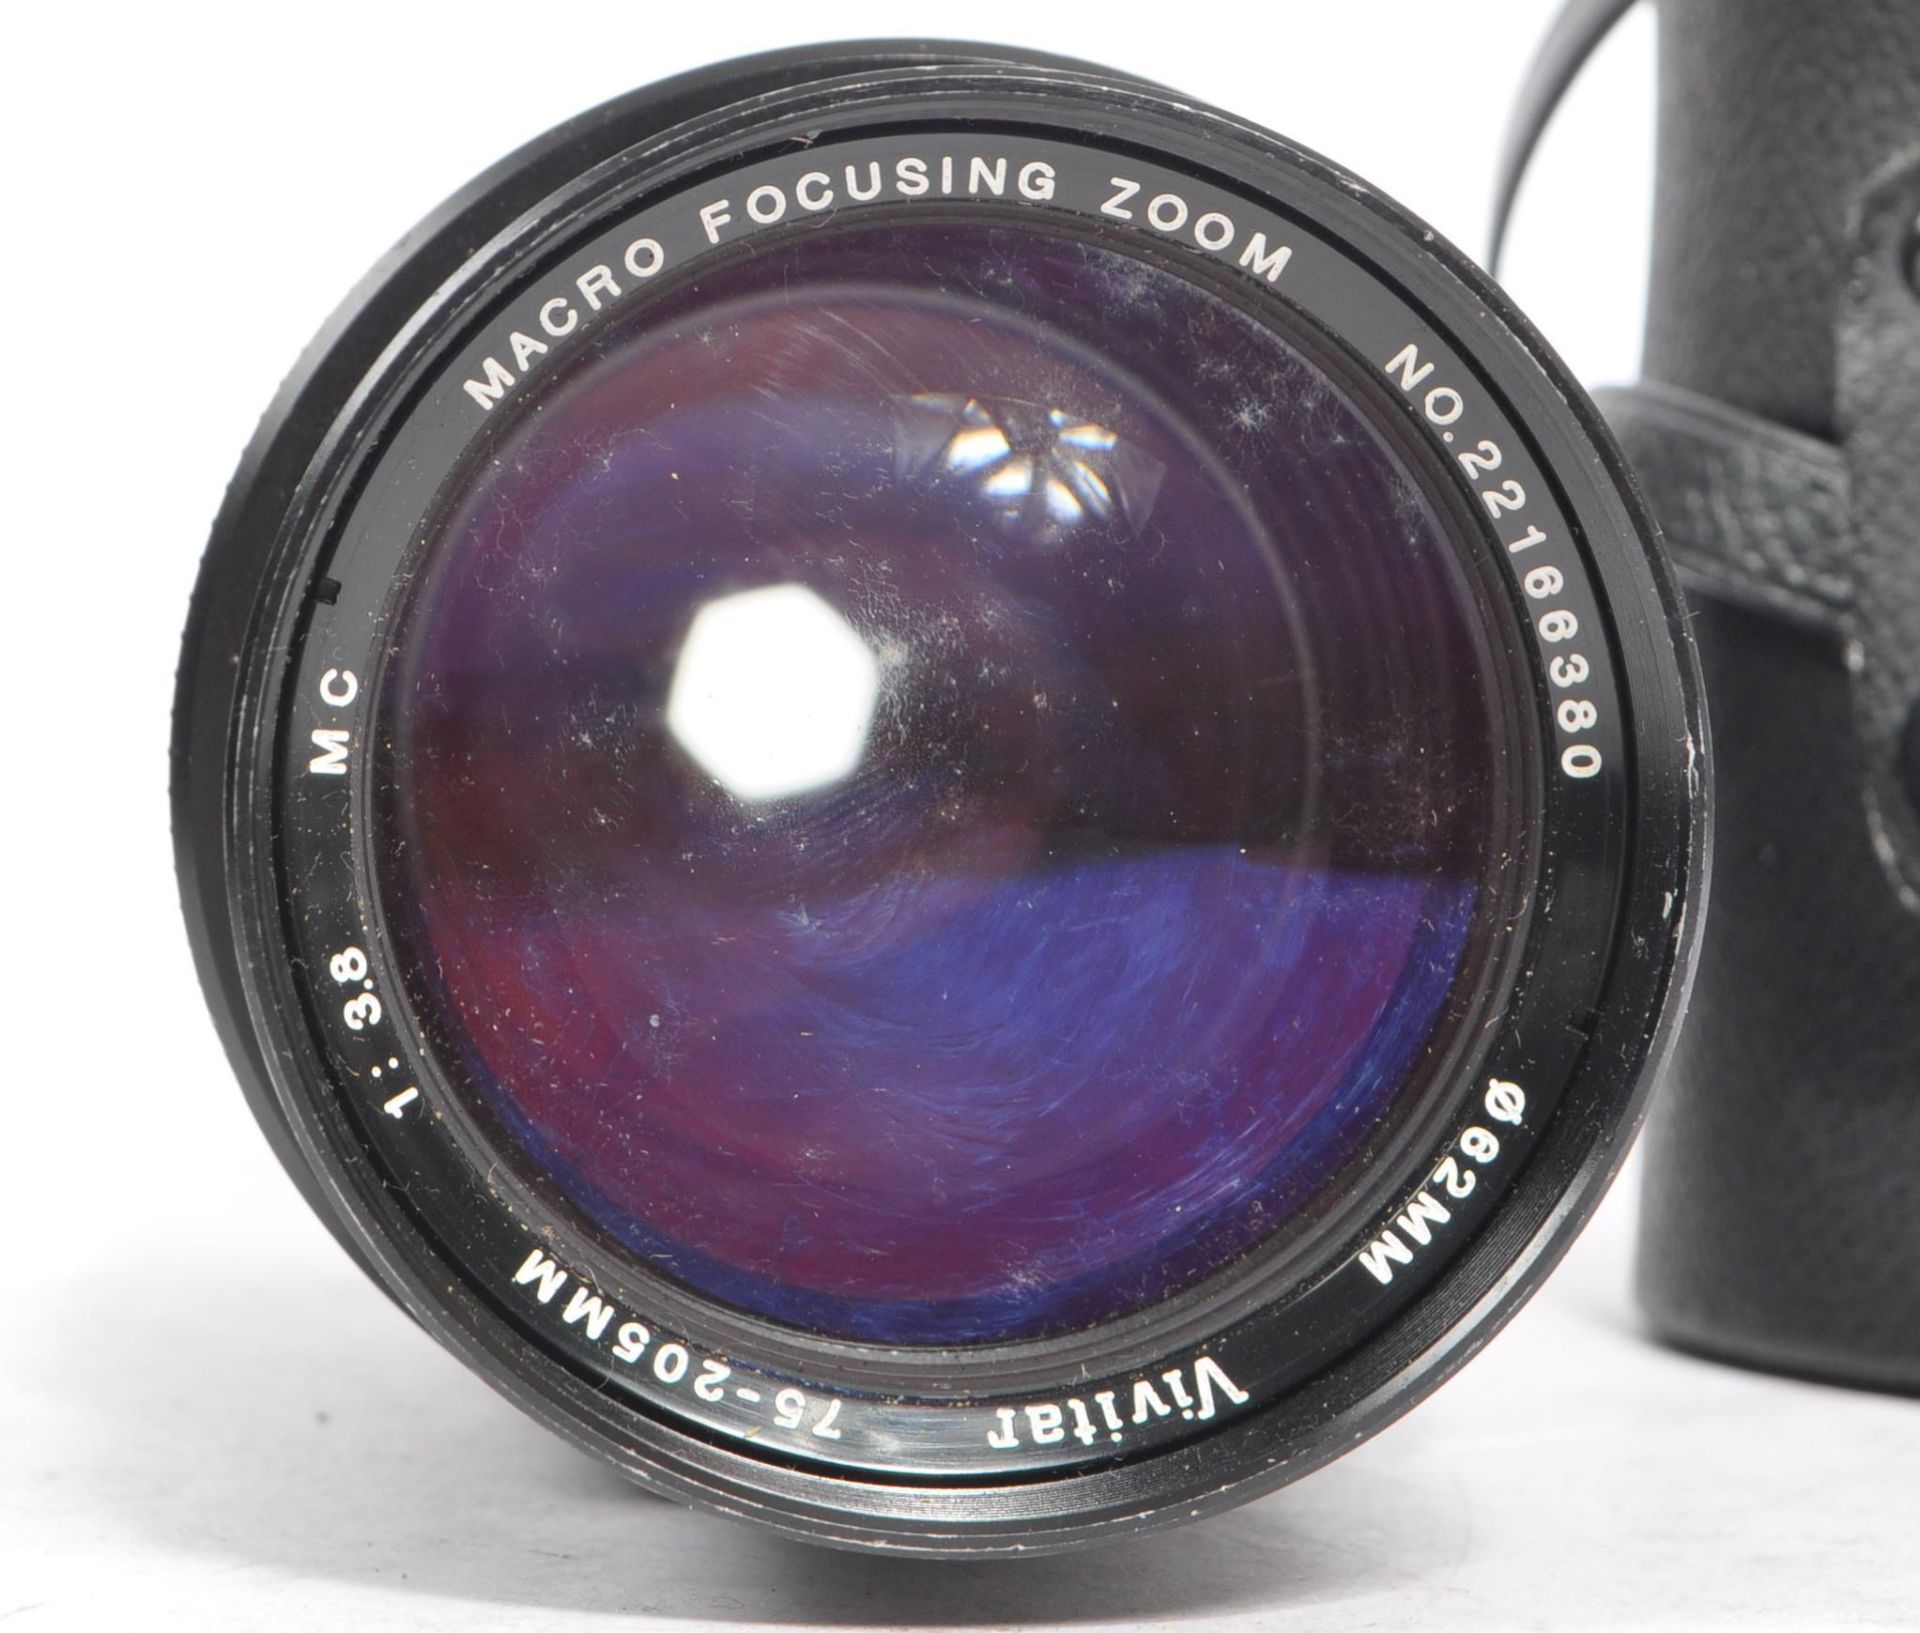 PRAKTICA - COLLECTION OF 35MM CAMERAS AND LENSES - Image 9 of 9